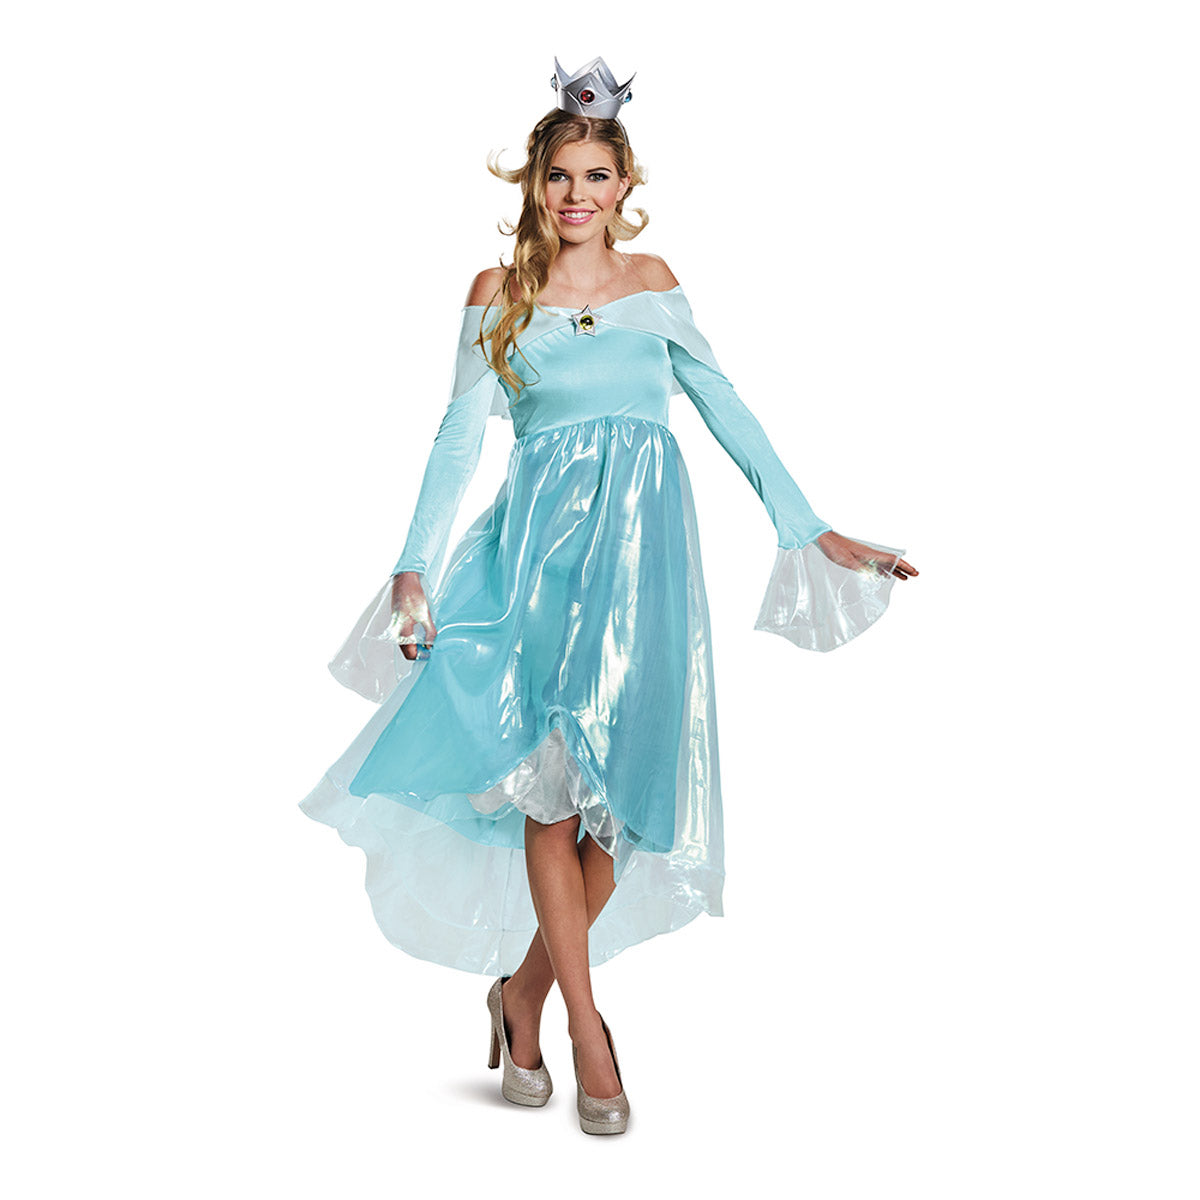 Rosalina Deluxe Adult Disguise 23172